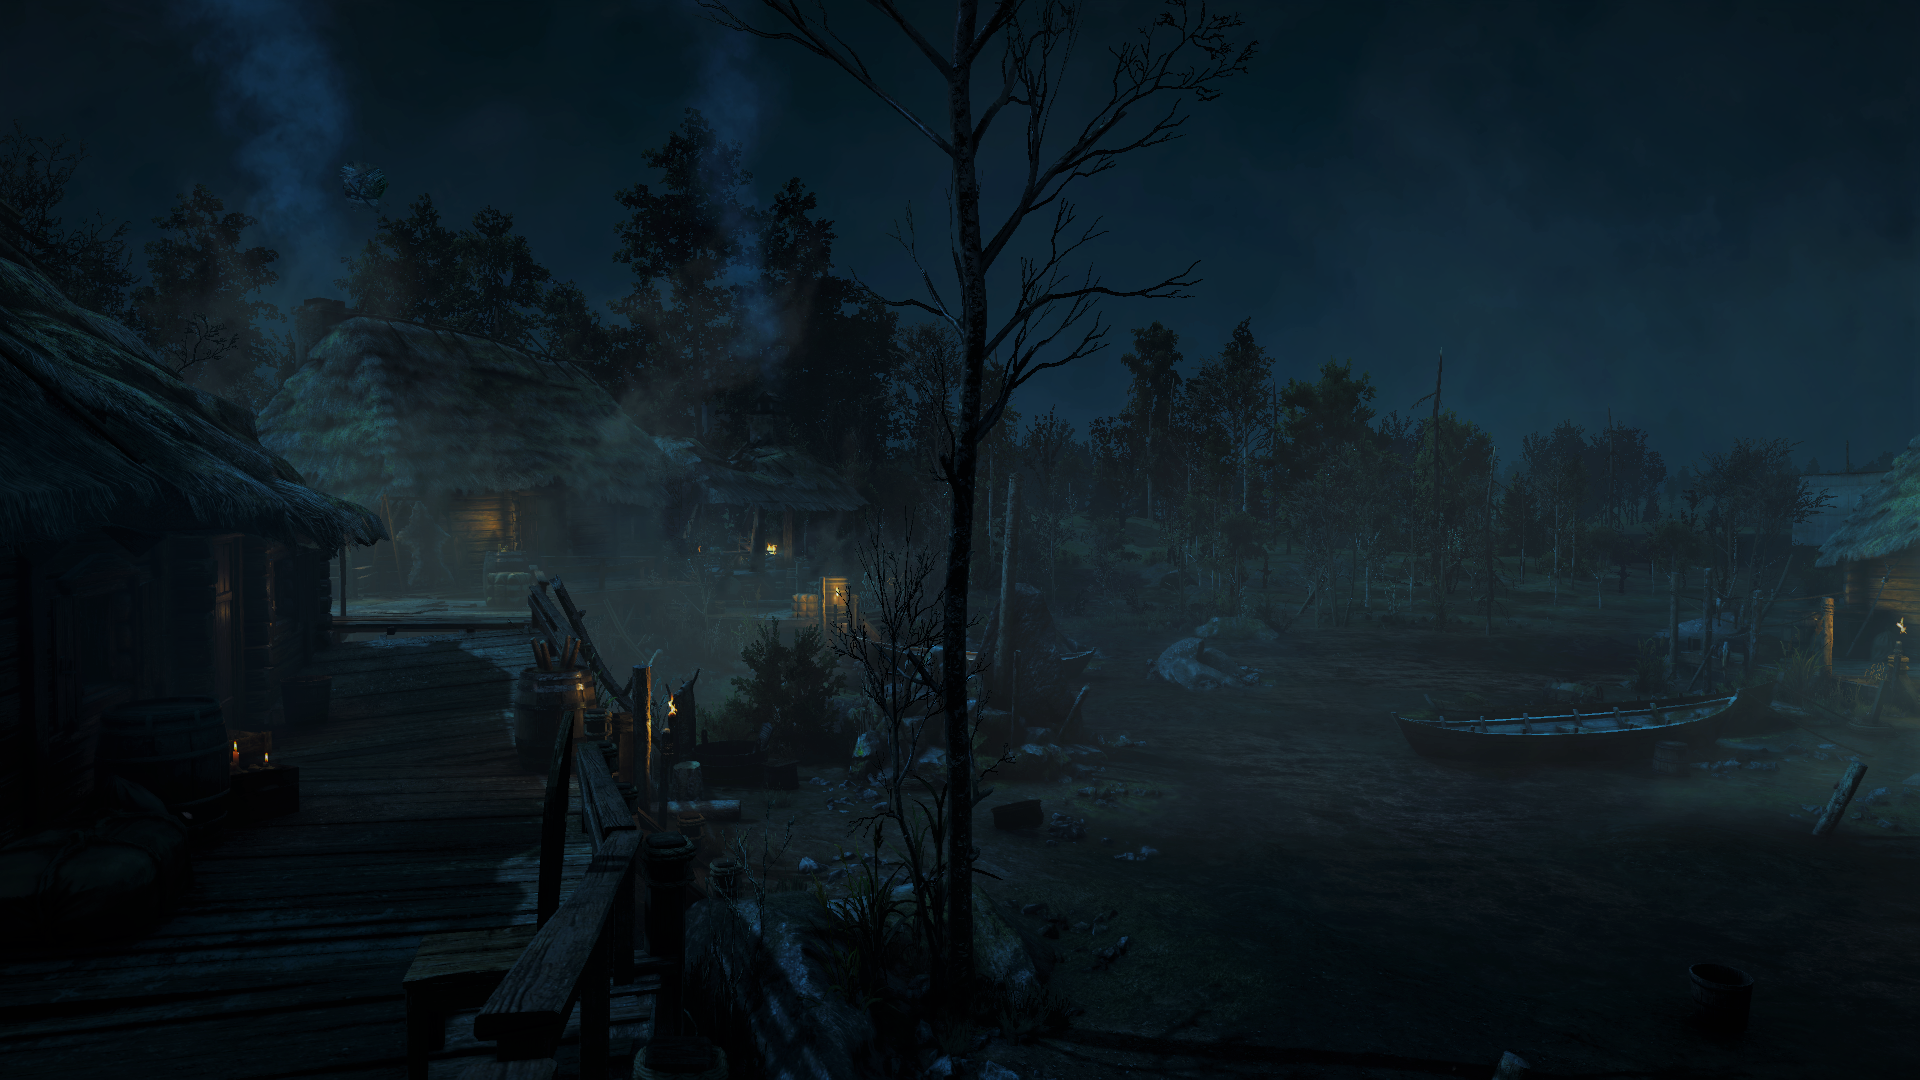 General 1920x1080 The Witcher The Witcher 3: Wild Hunt night atmosphere